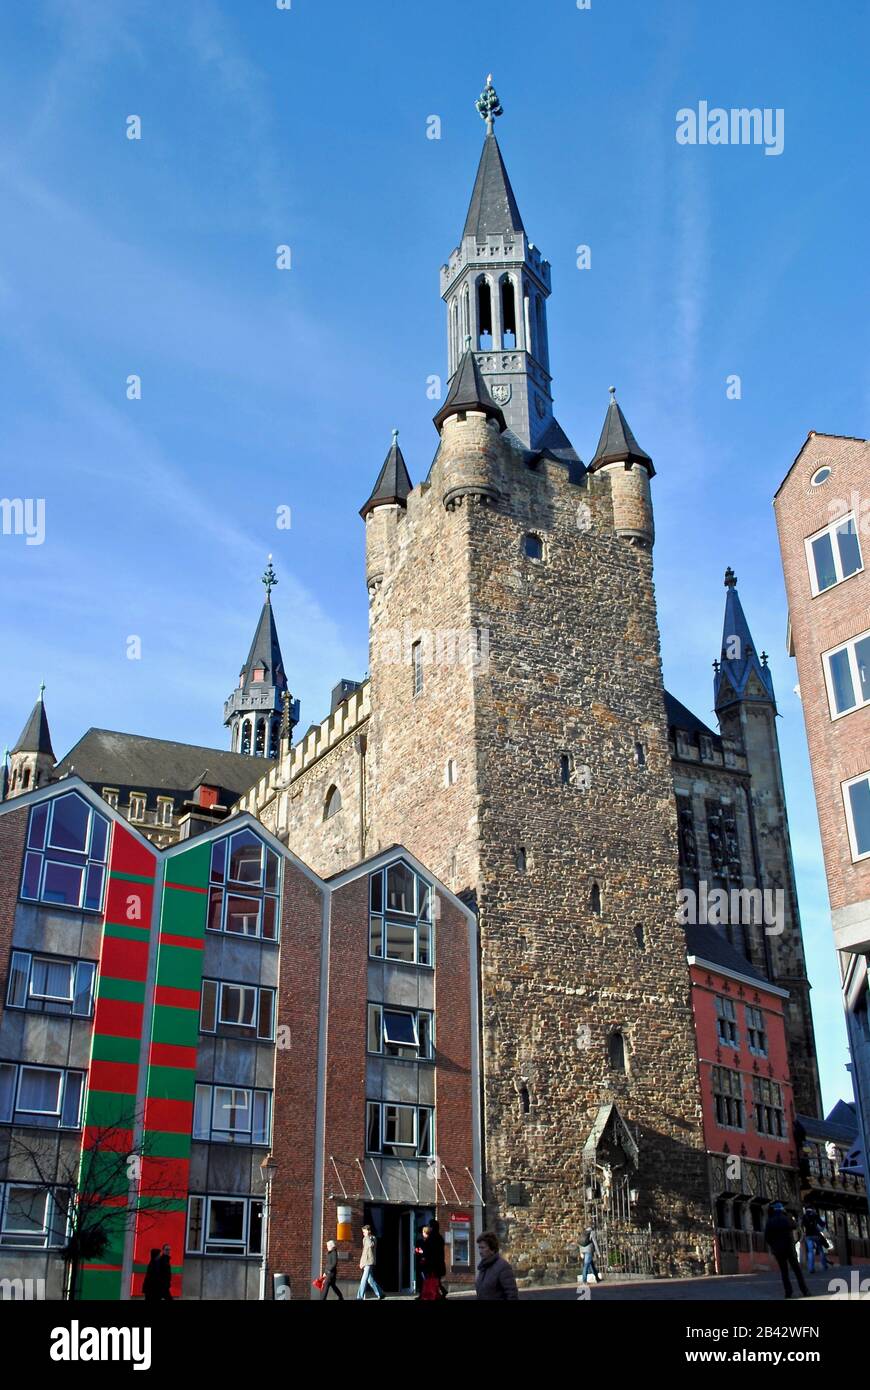 Aachener Rathaus (City Hall) Granusturm (Granus Tower) is the oldest surviving section of former Carolingian Imperial Palace of Emperor Charlemagne. Stock Photo